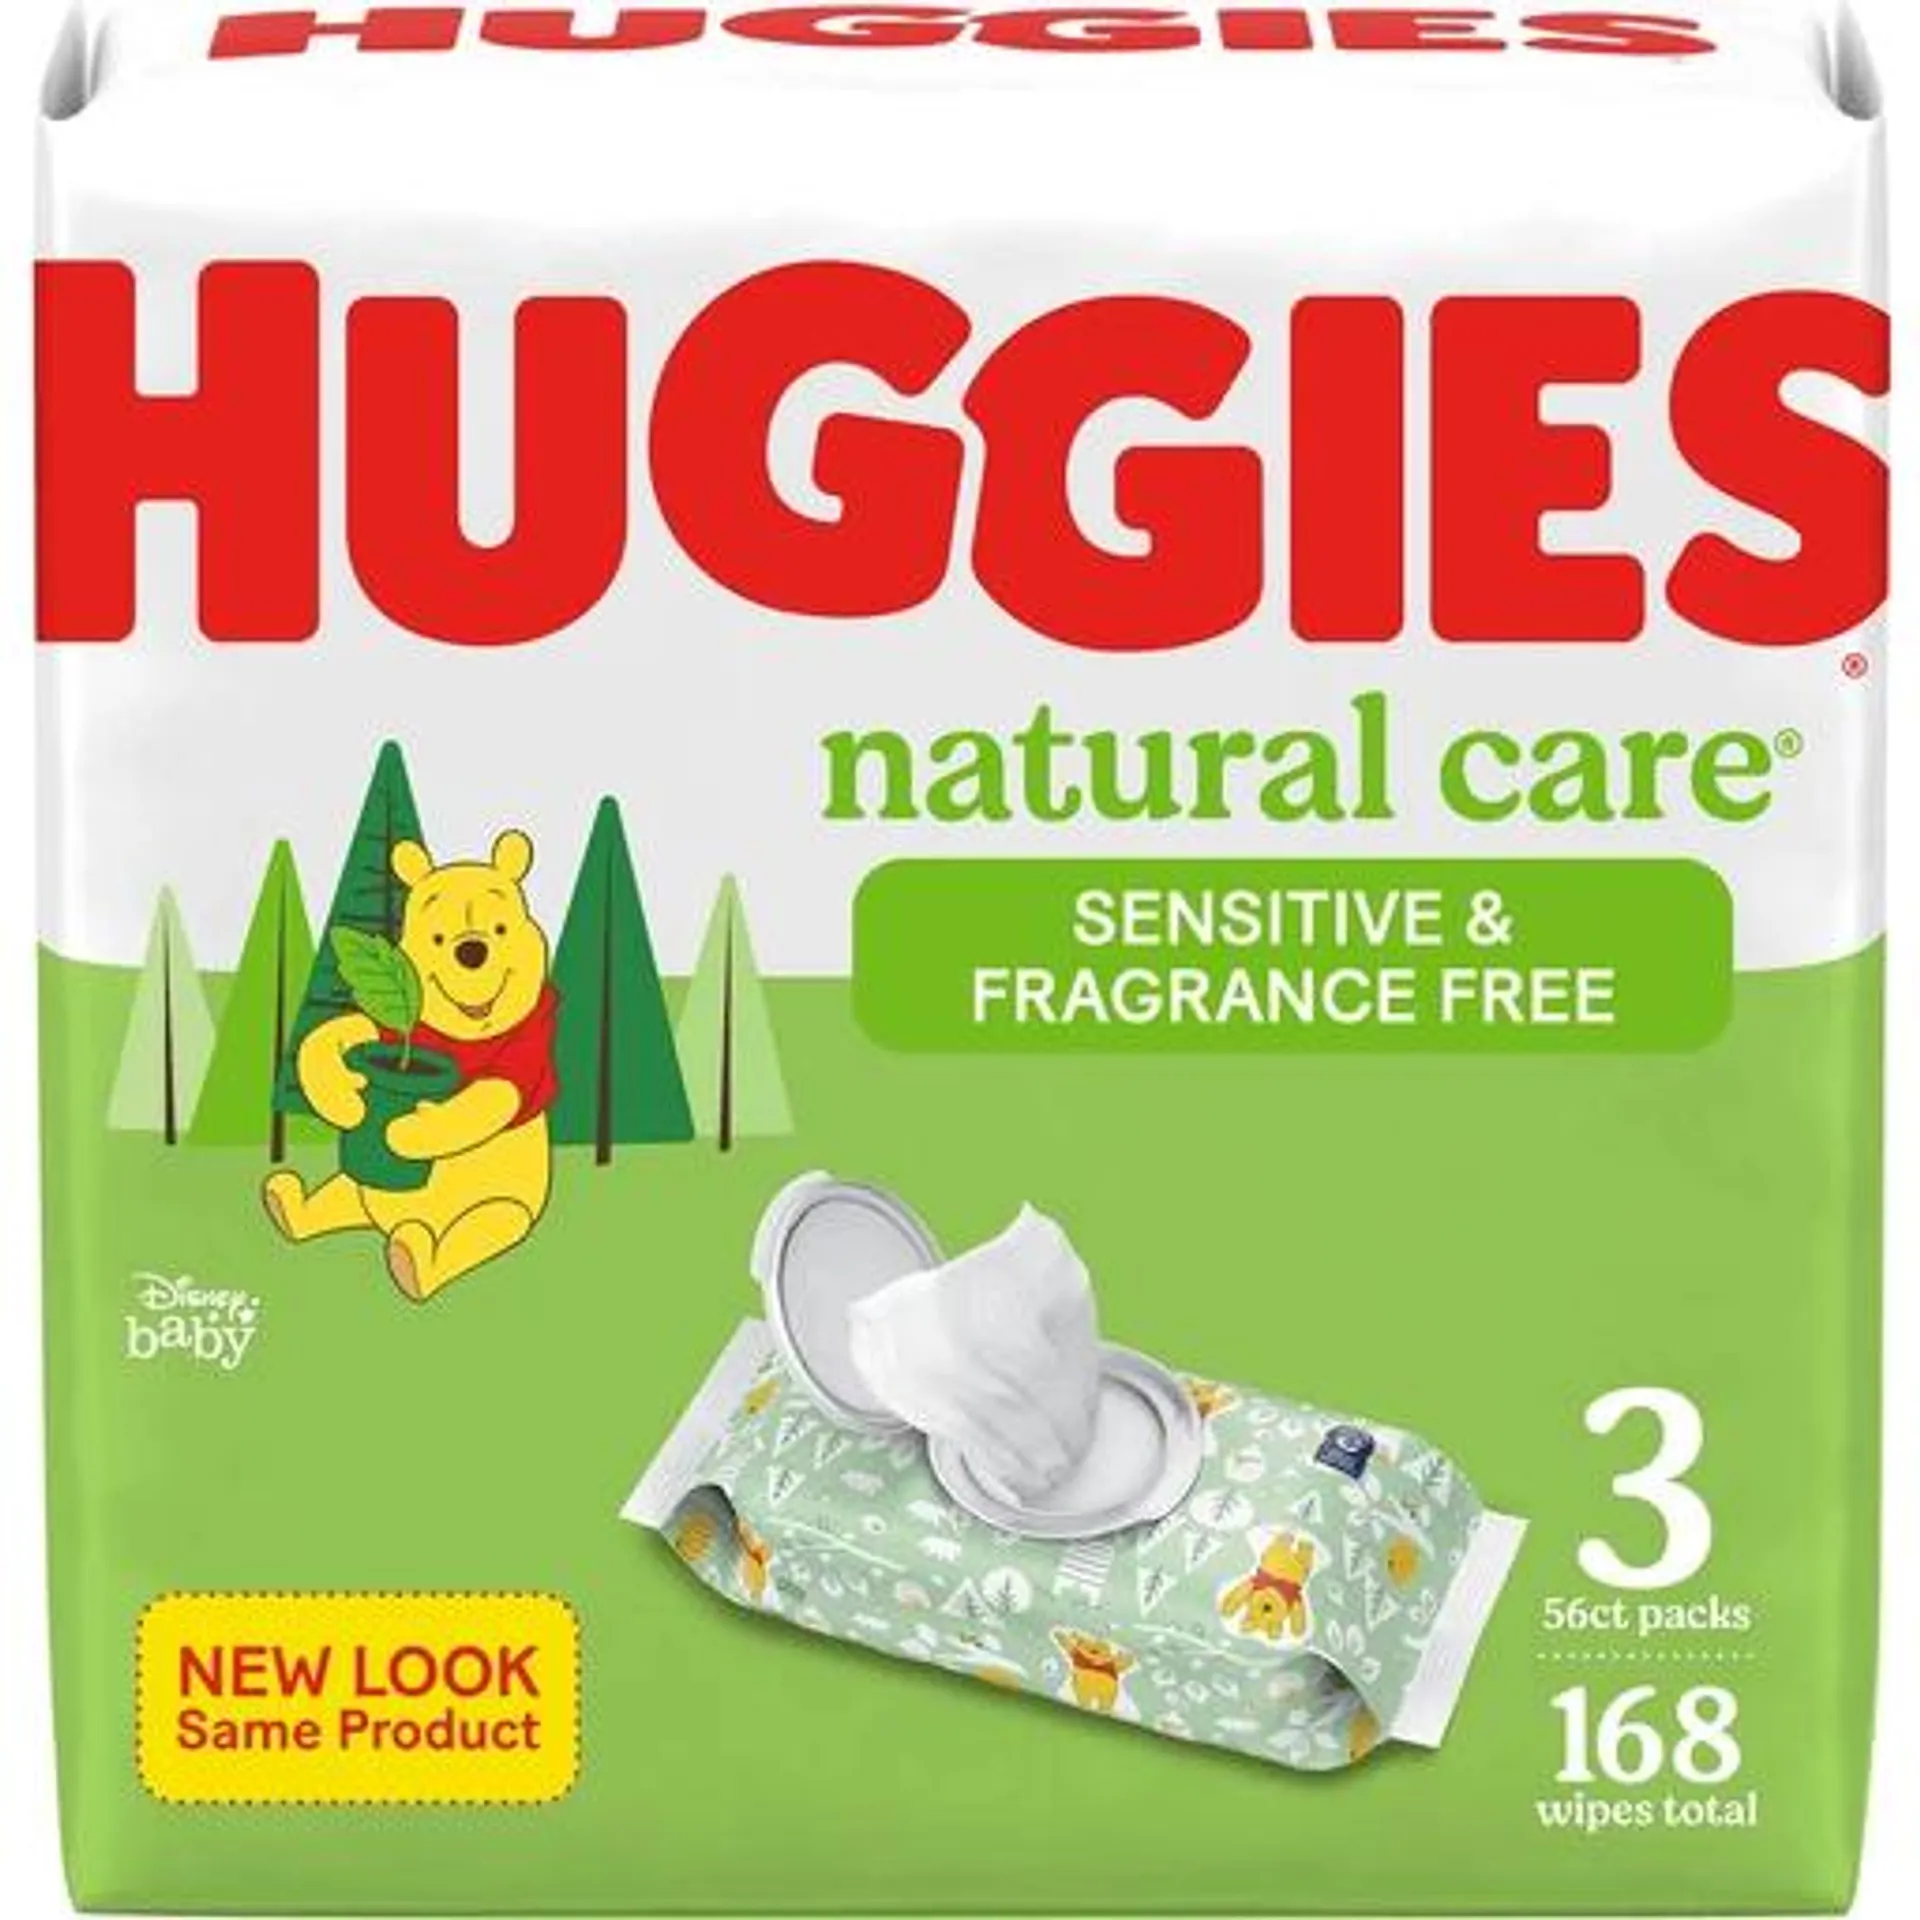 Huggies Natural Care Fragrance Free Sensitive Baby Wipes 168 ct package